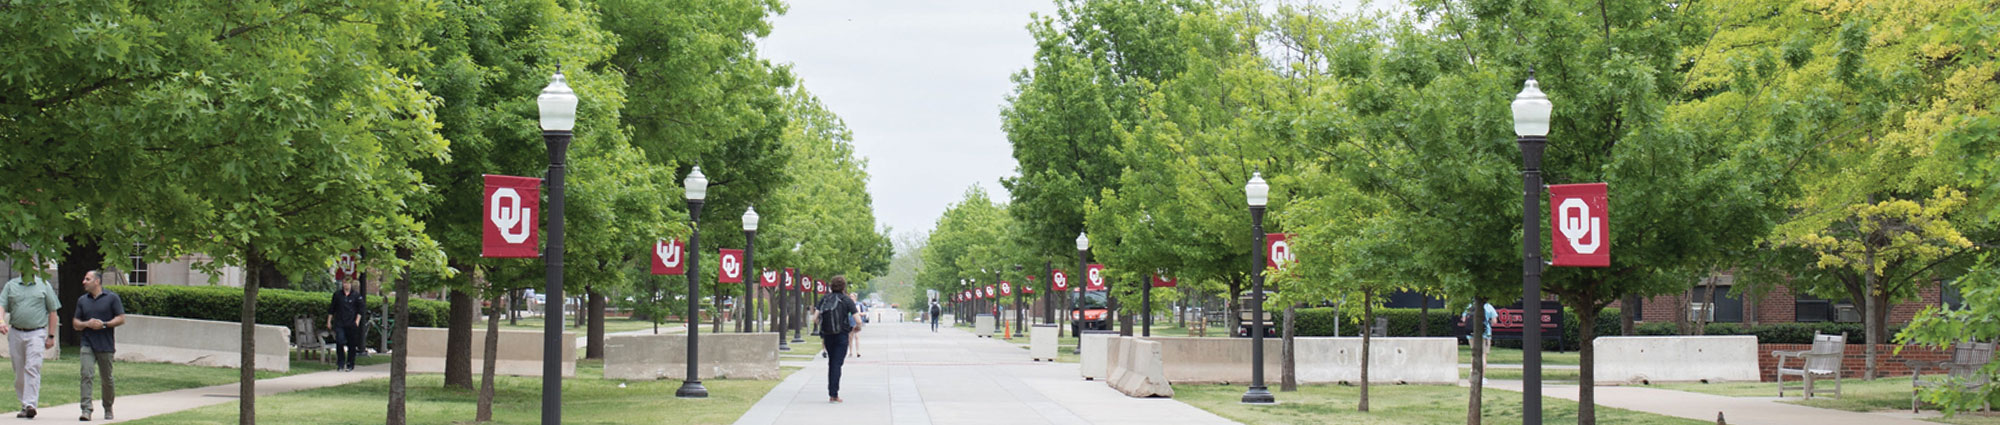 sidewalk with many trees and lampposts with OU flags on each side